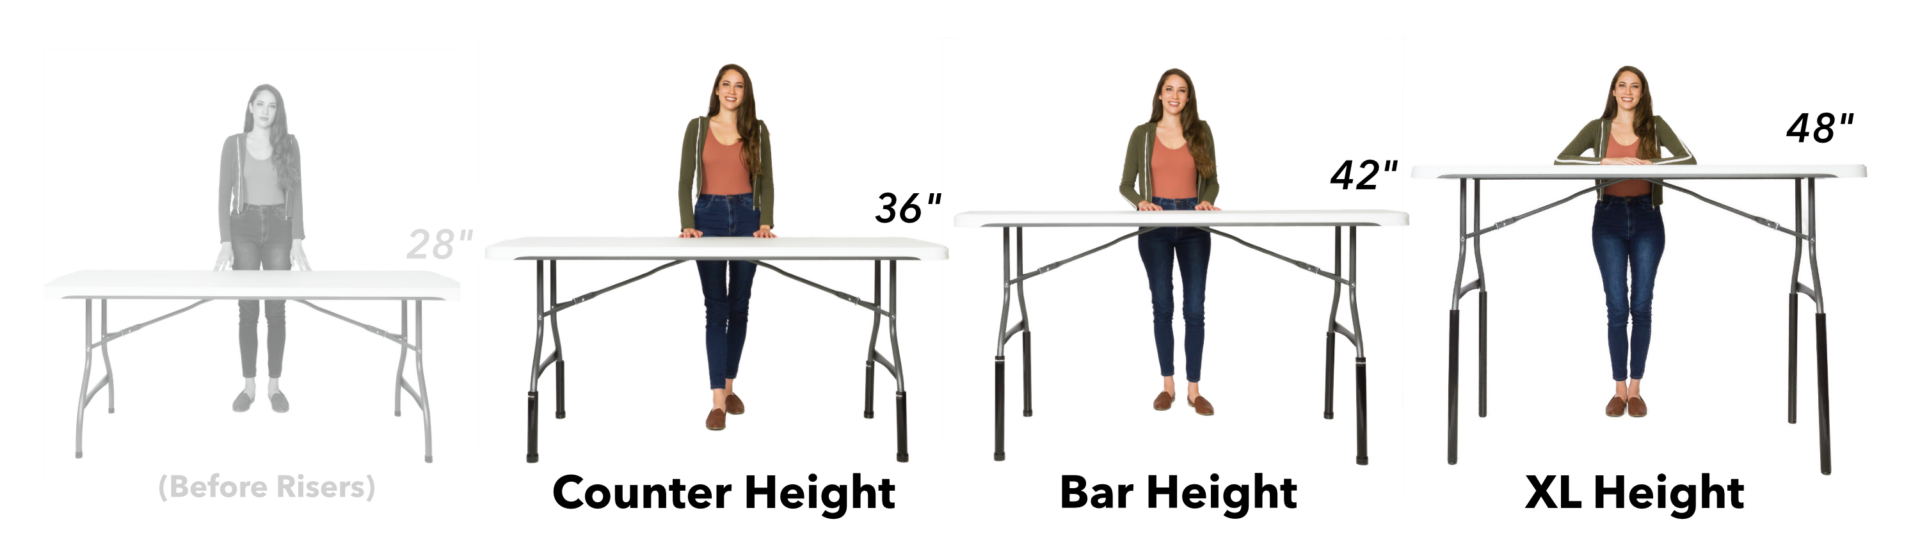 Imagine the possibilities of different height displays with Lift Your Table® folding table risers.